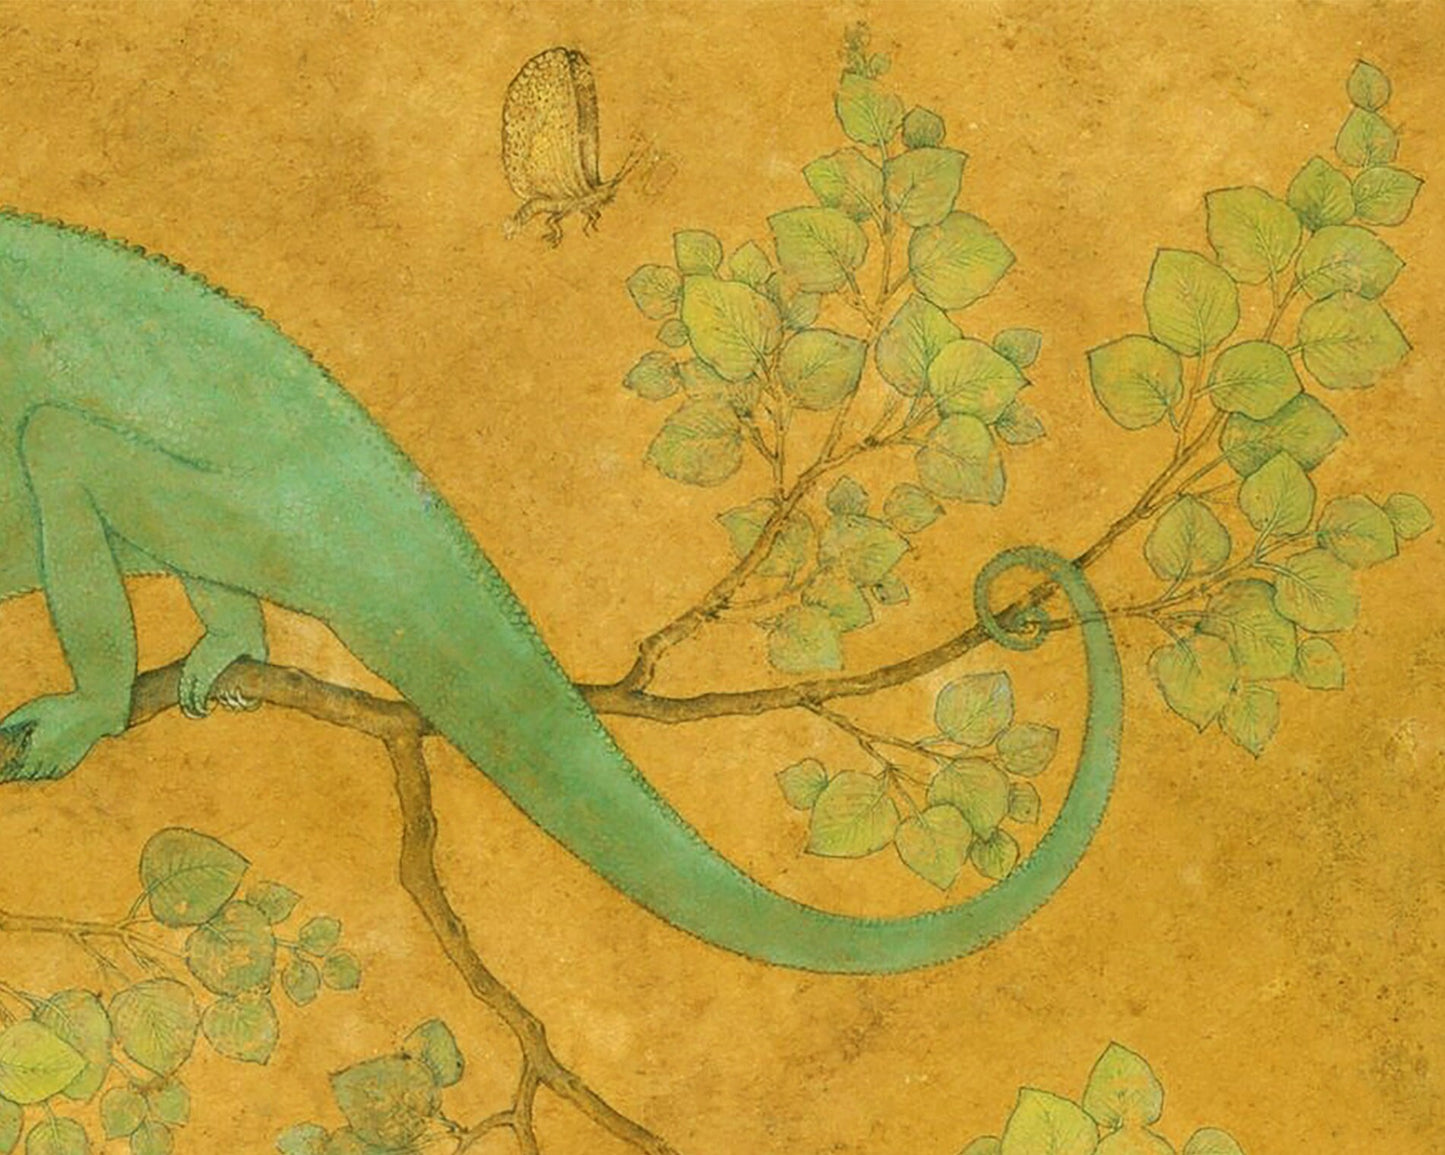 Chameleon in a tree | 17th century natural science | Antique Animal and Nature art | Indian painter Ustad Mansur | Eco-friendly